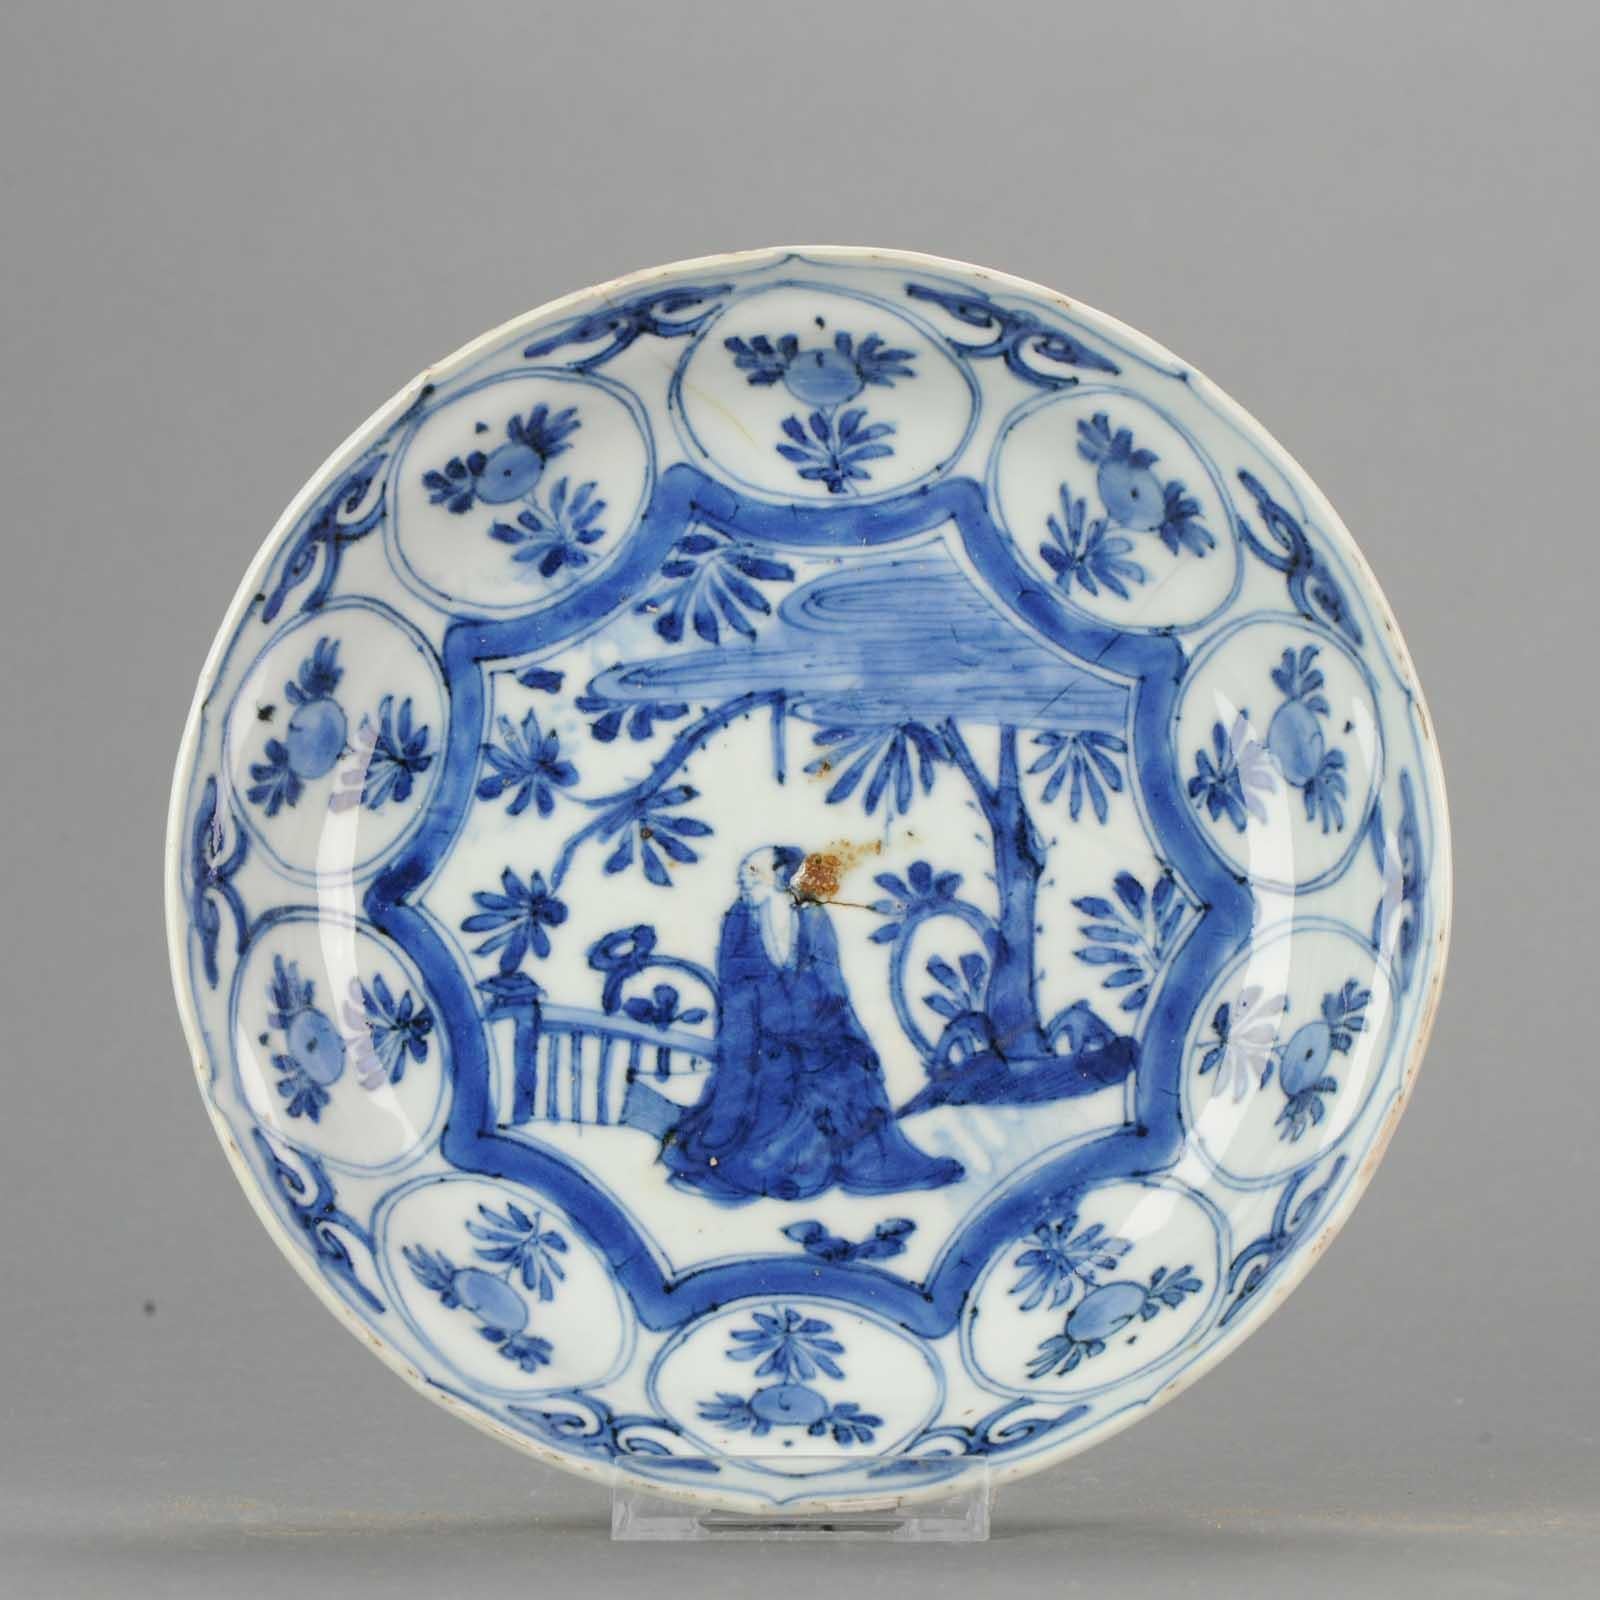 Rare and nicely decorated dish. Very unusual decoration and superb quality of painting and potting. Ca 1595-1645. Truly nice cobalt blue color

See: Maura Rinaldi: 